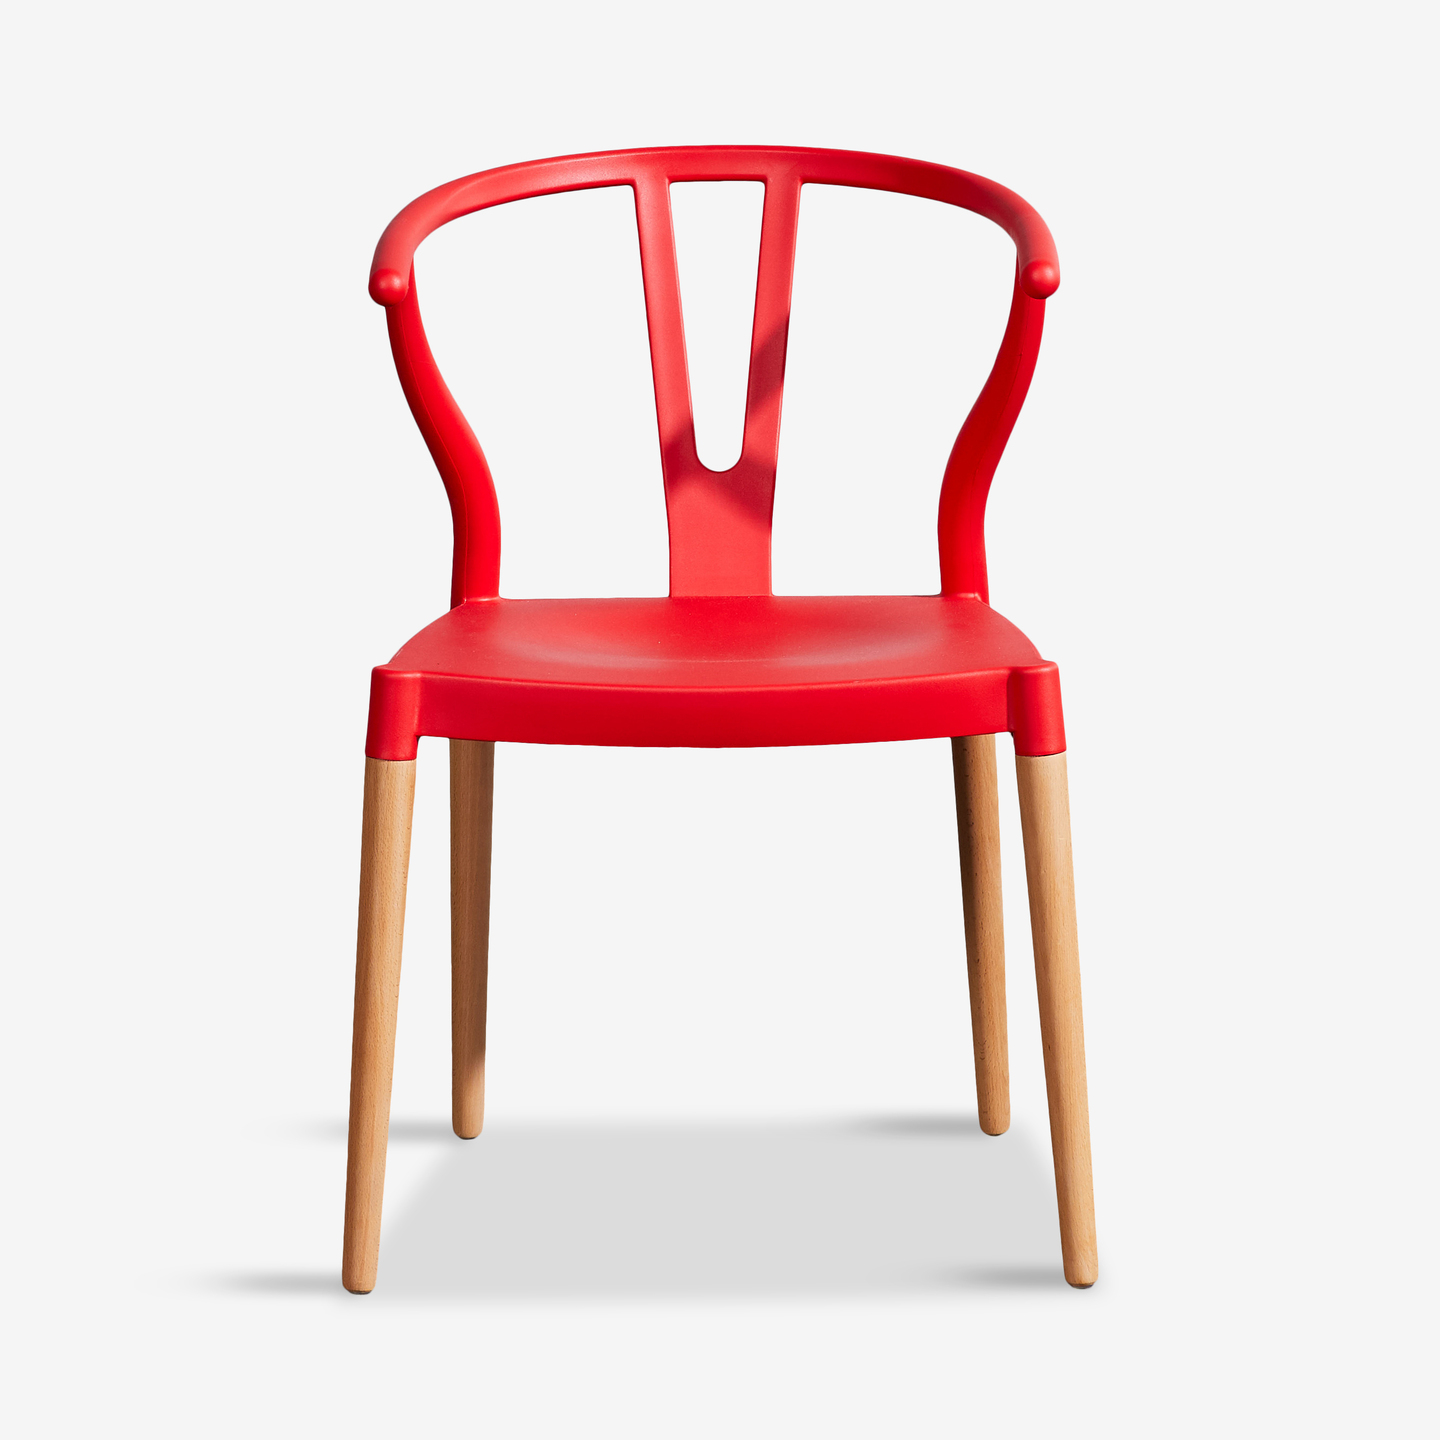 150_Wexler-Dining-Chair-Red_Flat-Front 2020